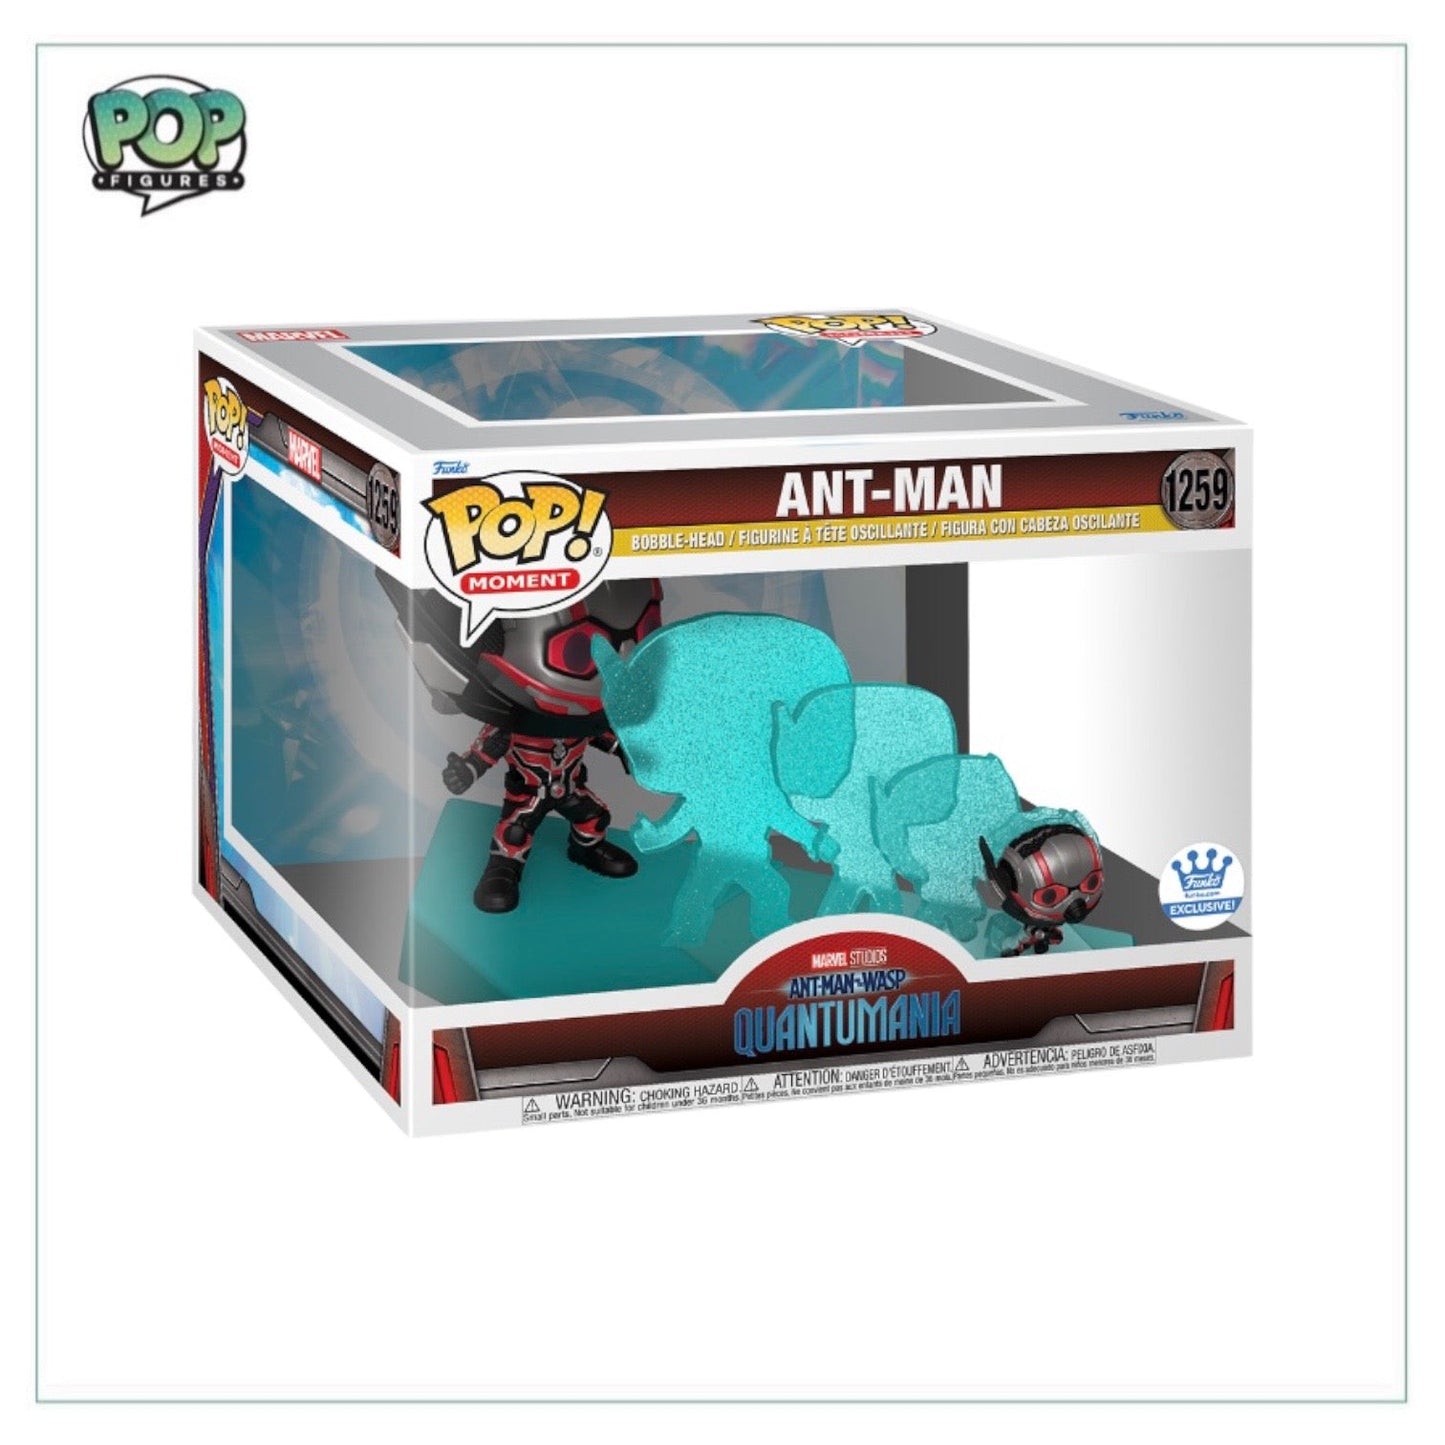 Ant-Man #1259 Funko Pop Moment! - Ant-Man and the Wasp Quantumania - Funko Shop Exclusive - Angry Cat